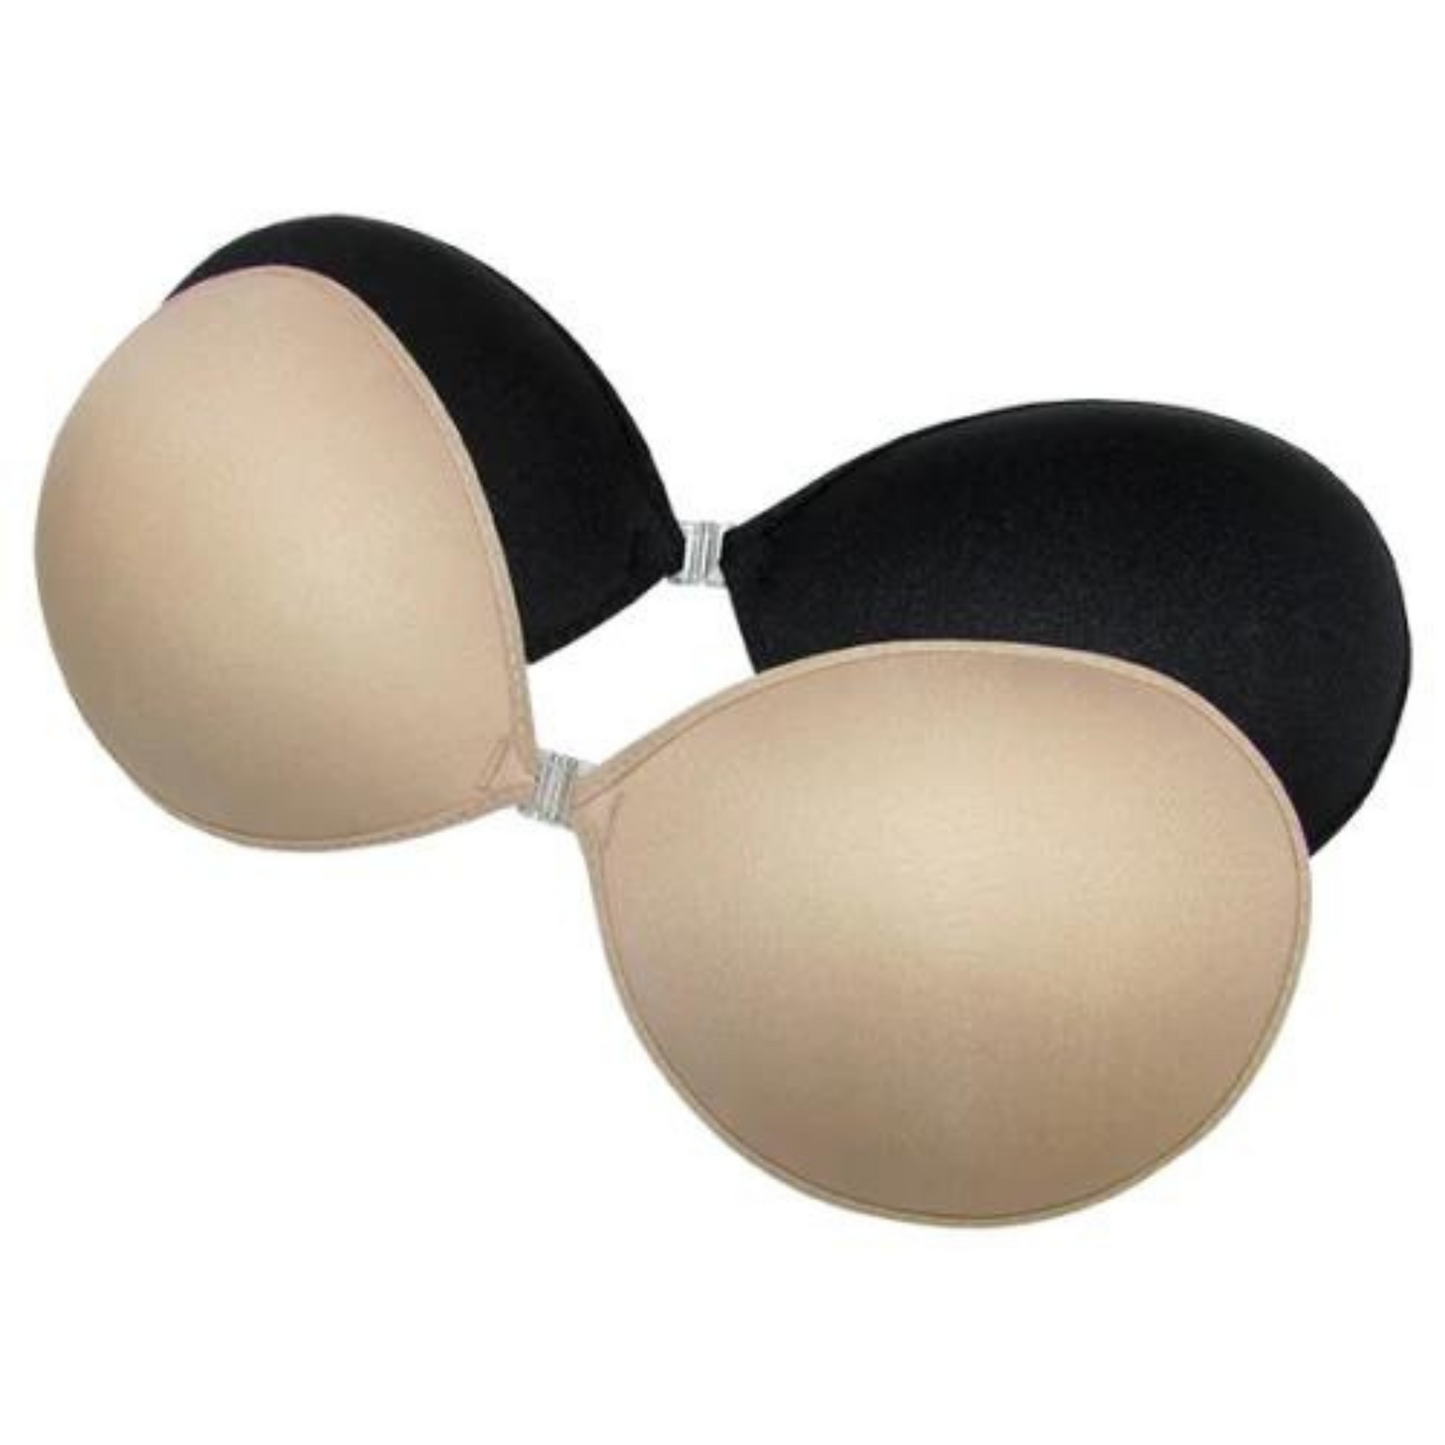 This Cloth Adhesive Bra by Freebra is the perfect solution for those special occasions when you need a discreet and comfortable fit. Offering a nude and black color option, this product is designed to adhere to your skin and move with you all day.